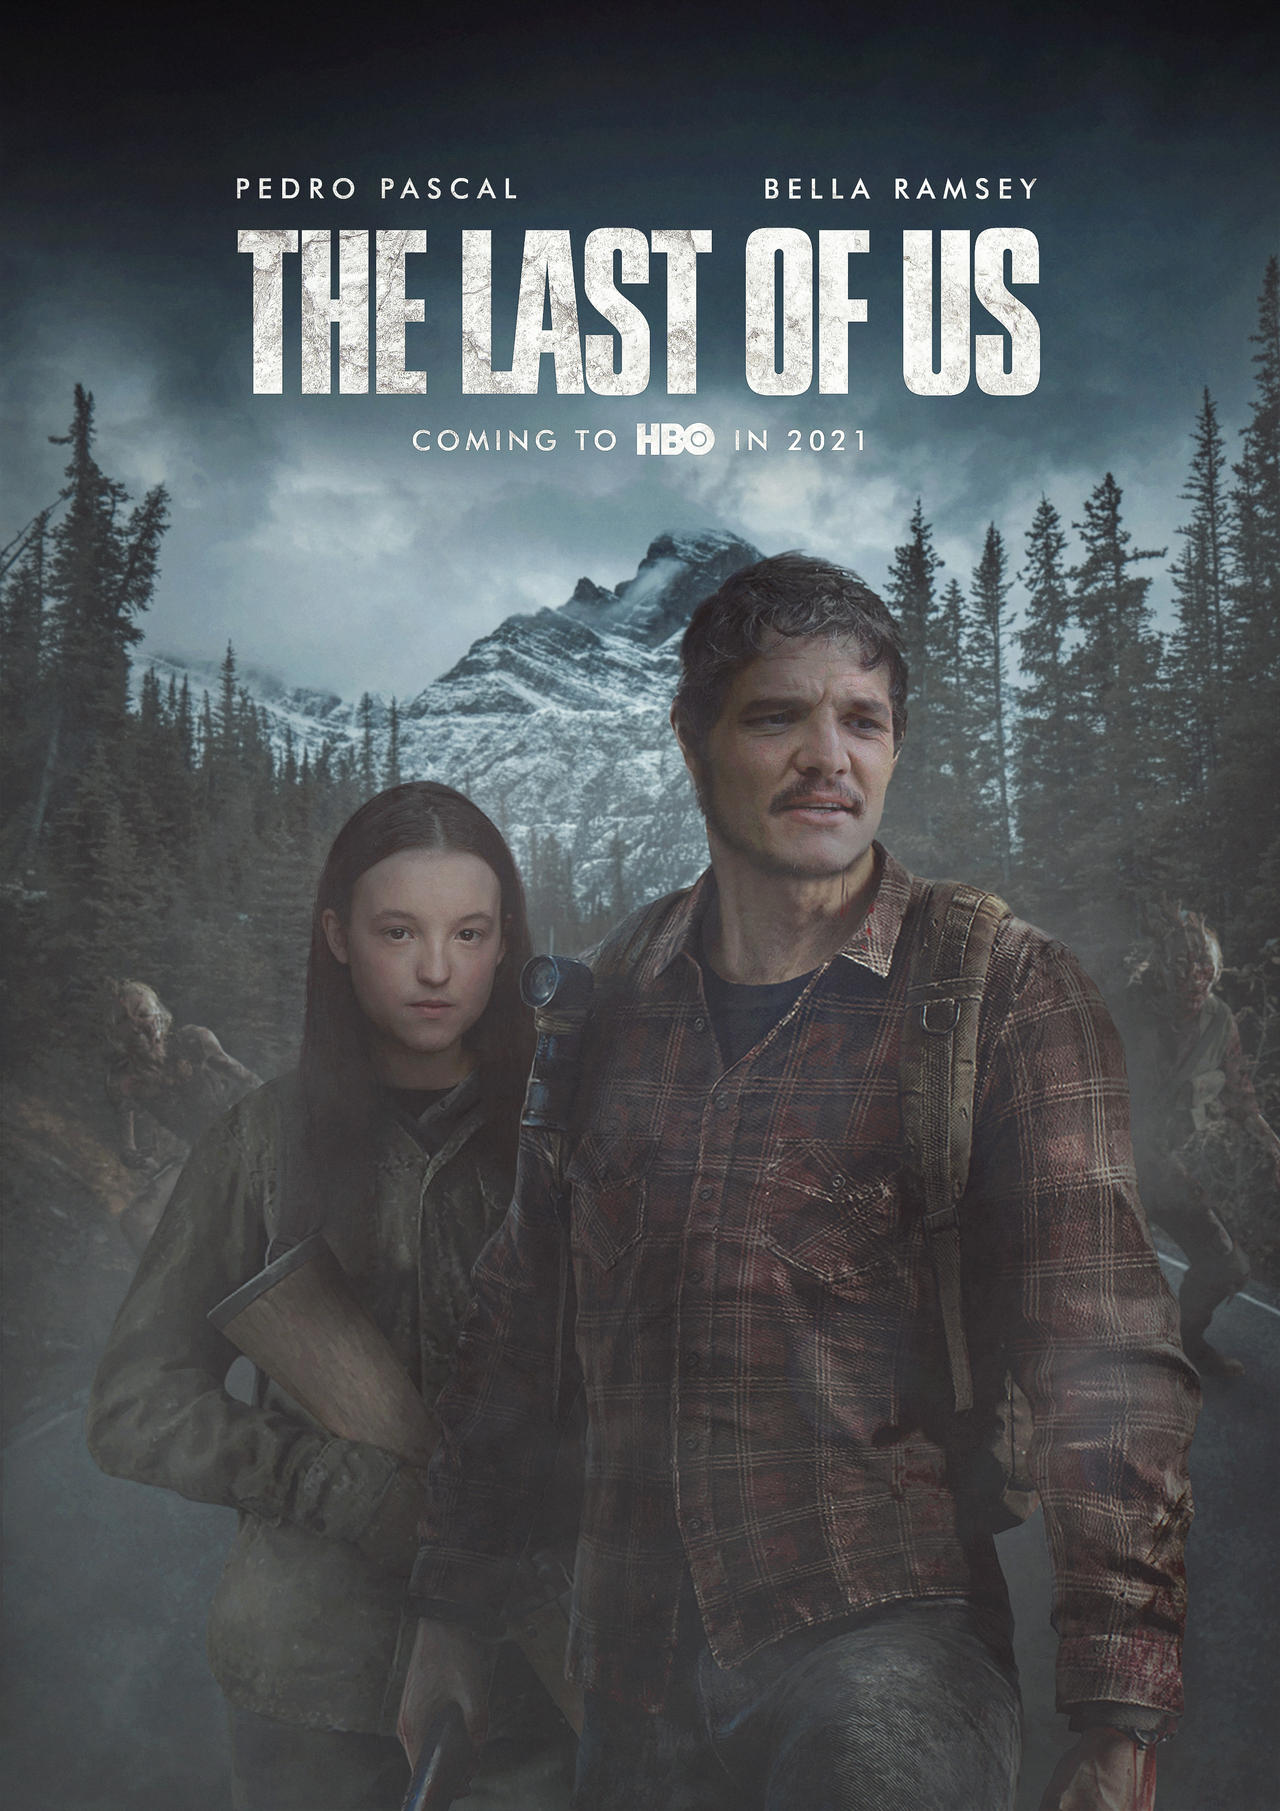 The Last of Us - Poster Concept by Byzial on DeviantArt